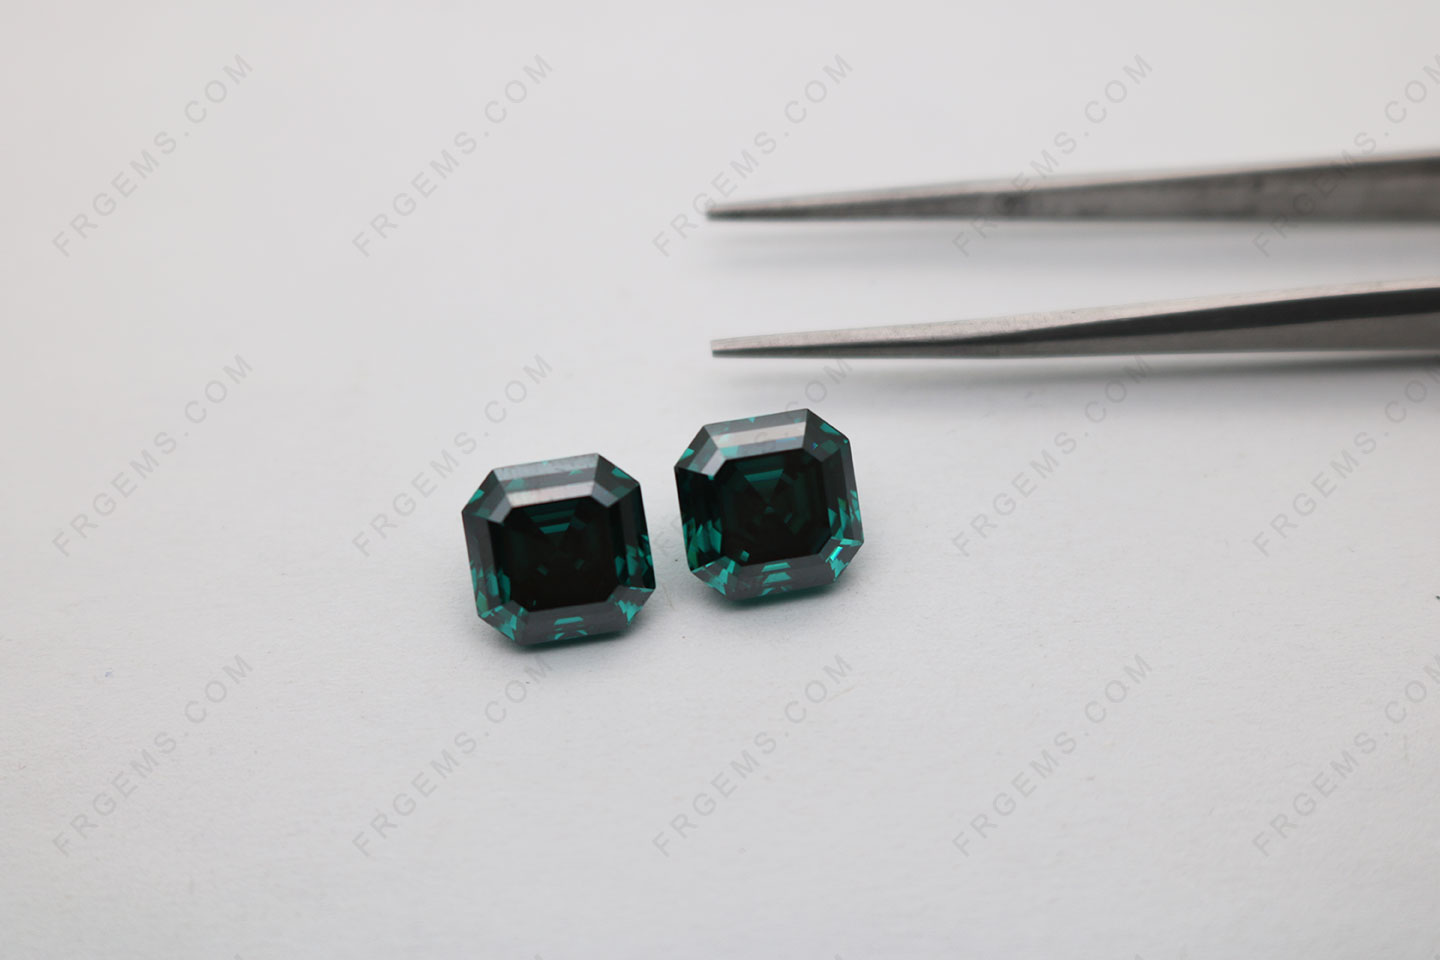 Buy Loose Moissanite Green color Asscher Cut 10x10mm gemstones at cheap price from China factory